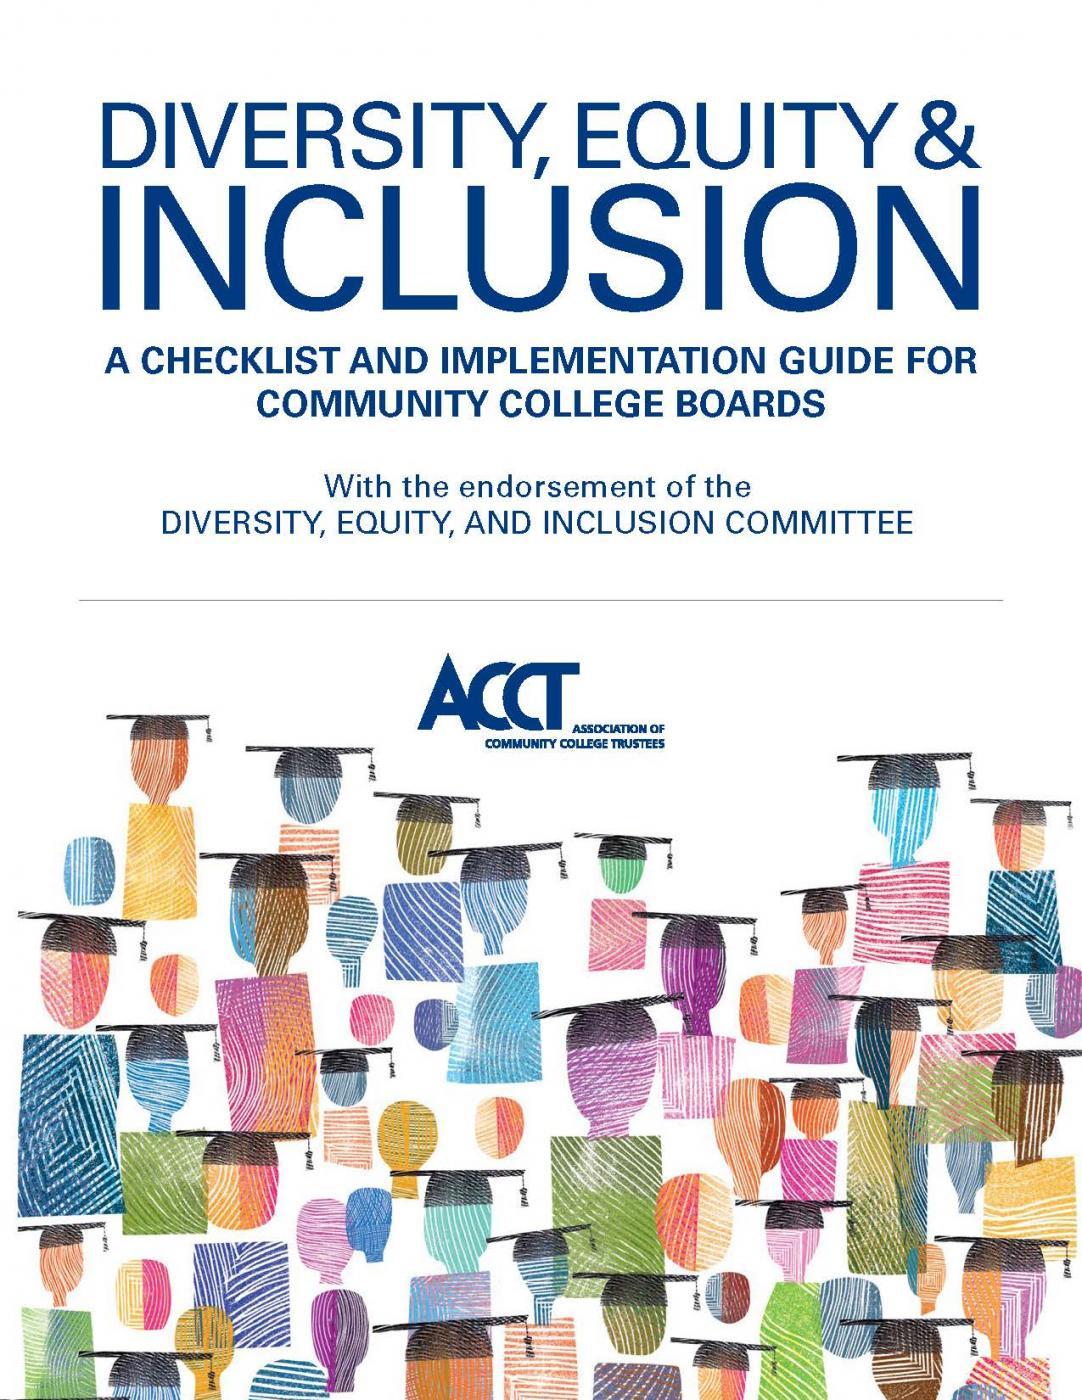 Diversity, Equity & Inclusion (2020)  A Checklist and Implementation Guide for Community College Boards